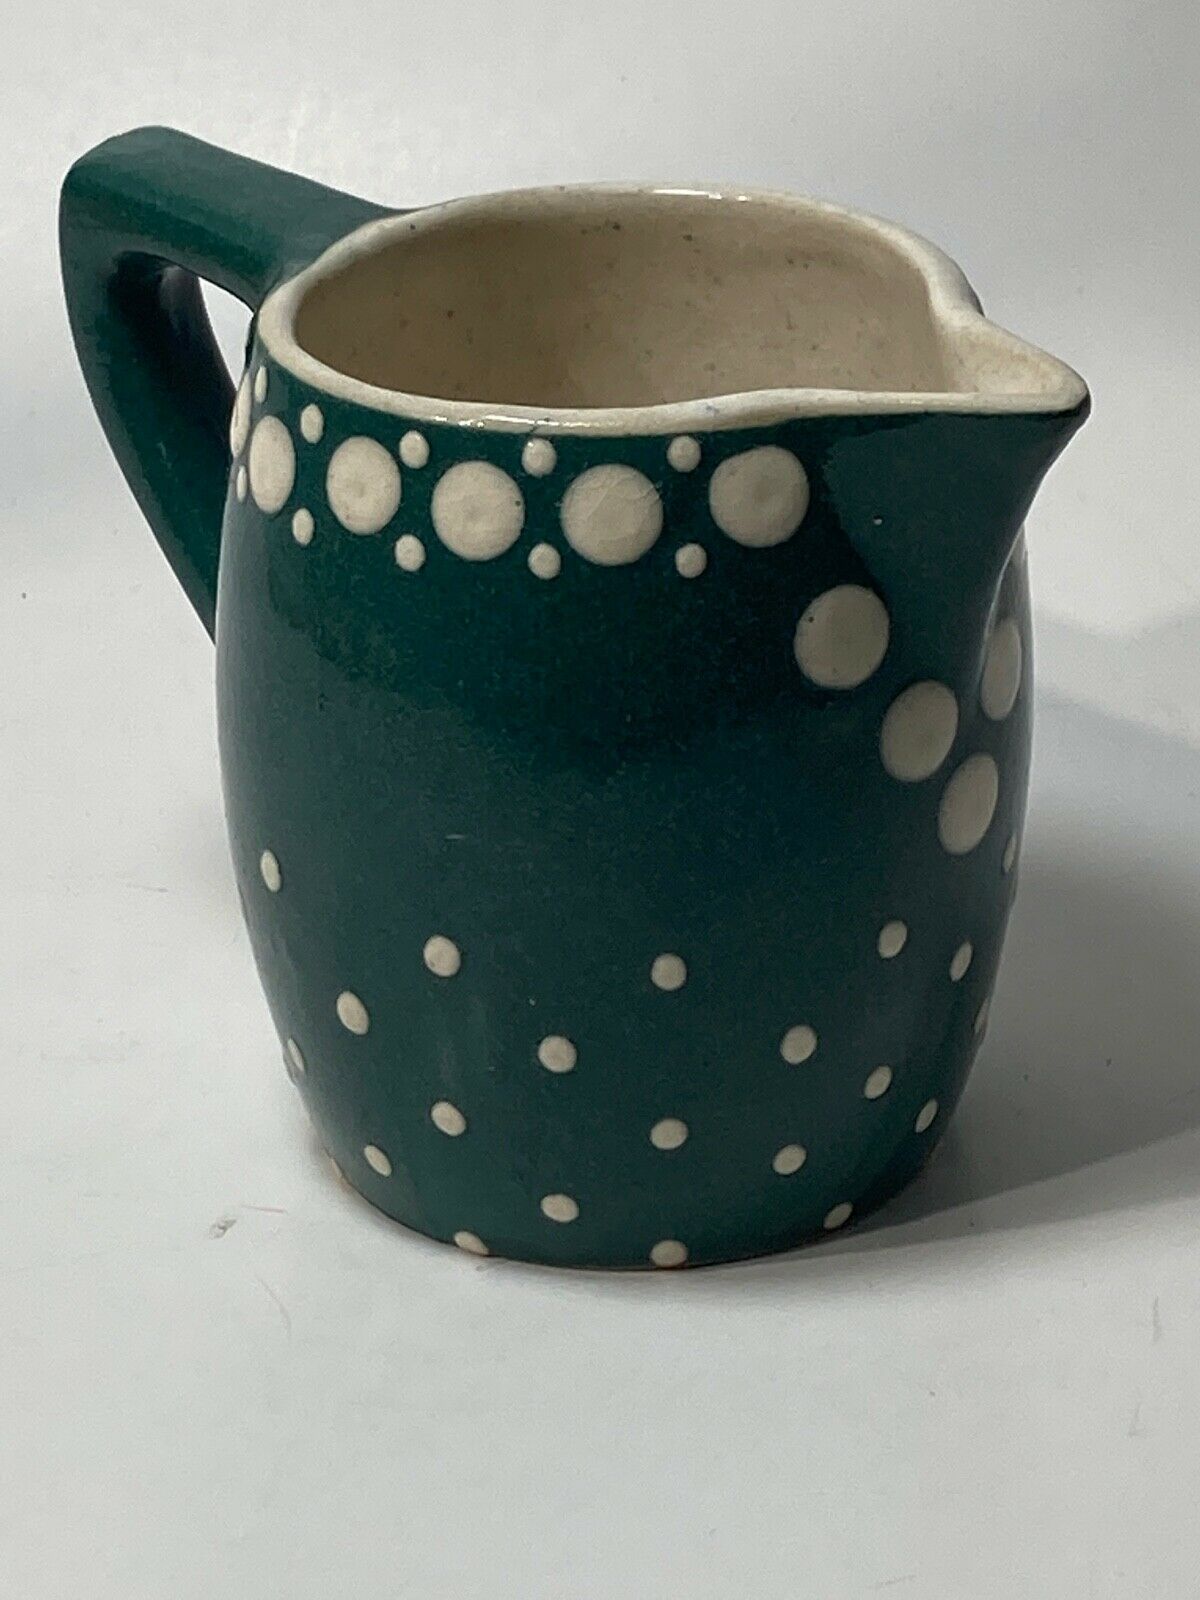 Vintage Germany Green Pottery Creamer #3 4" Tall With White Dots Very Nice